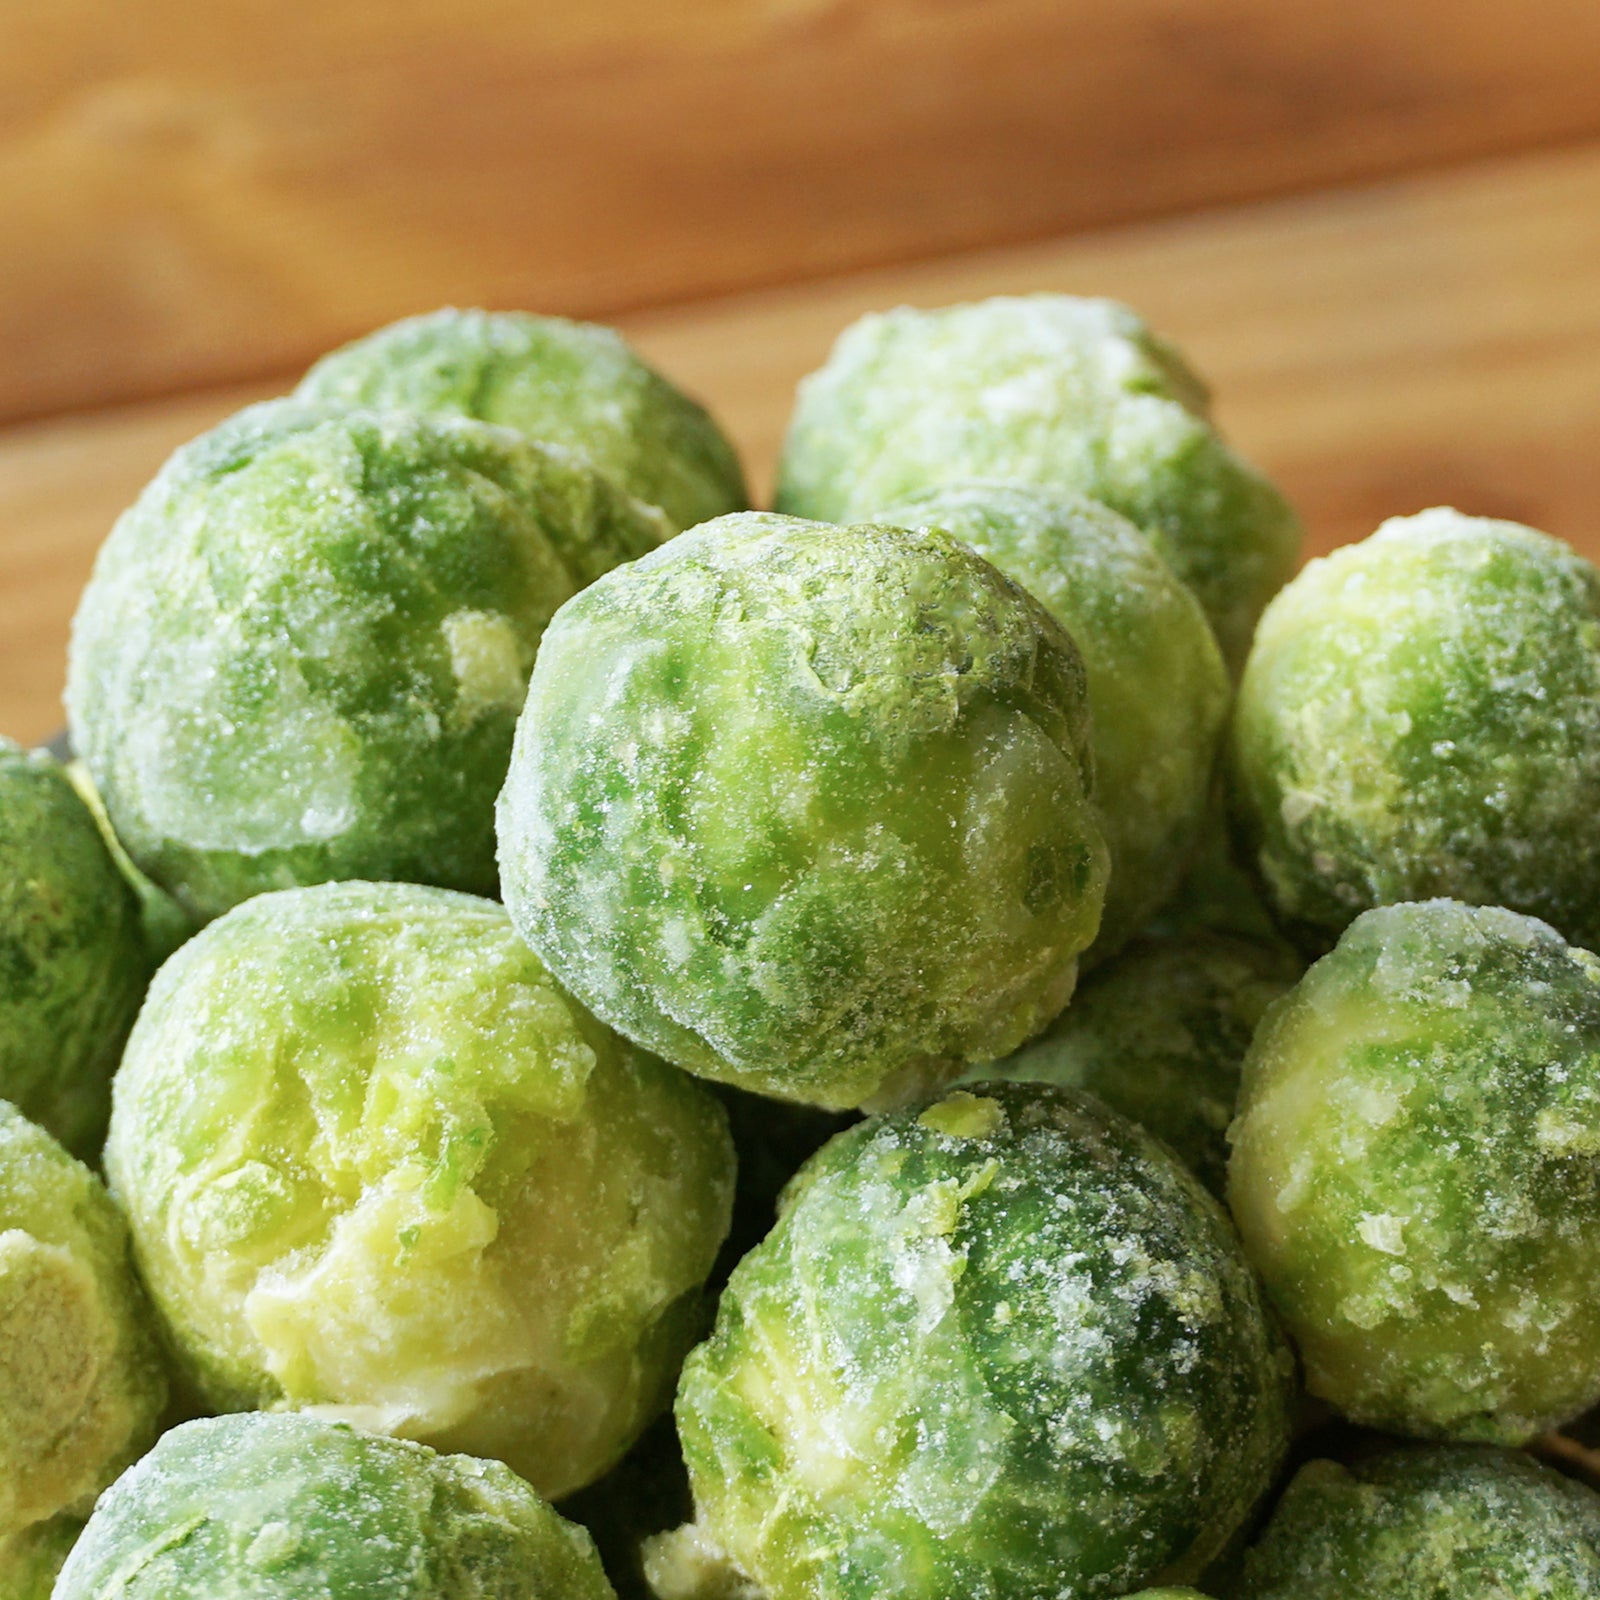 Certified Organic Frozen Brussels Sprouts from Belgium (2.5kg) - Horizon Farms